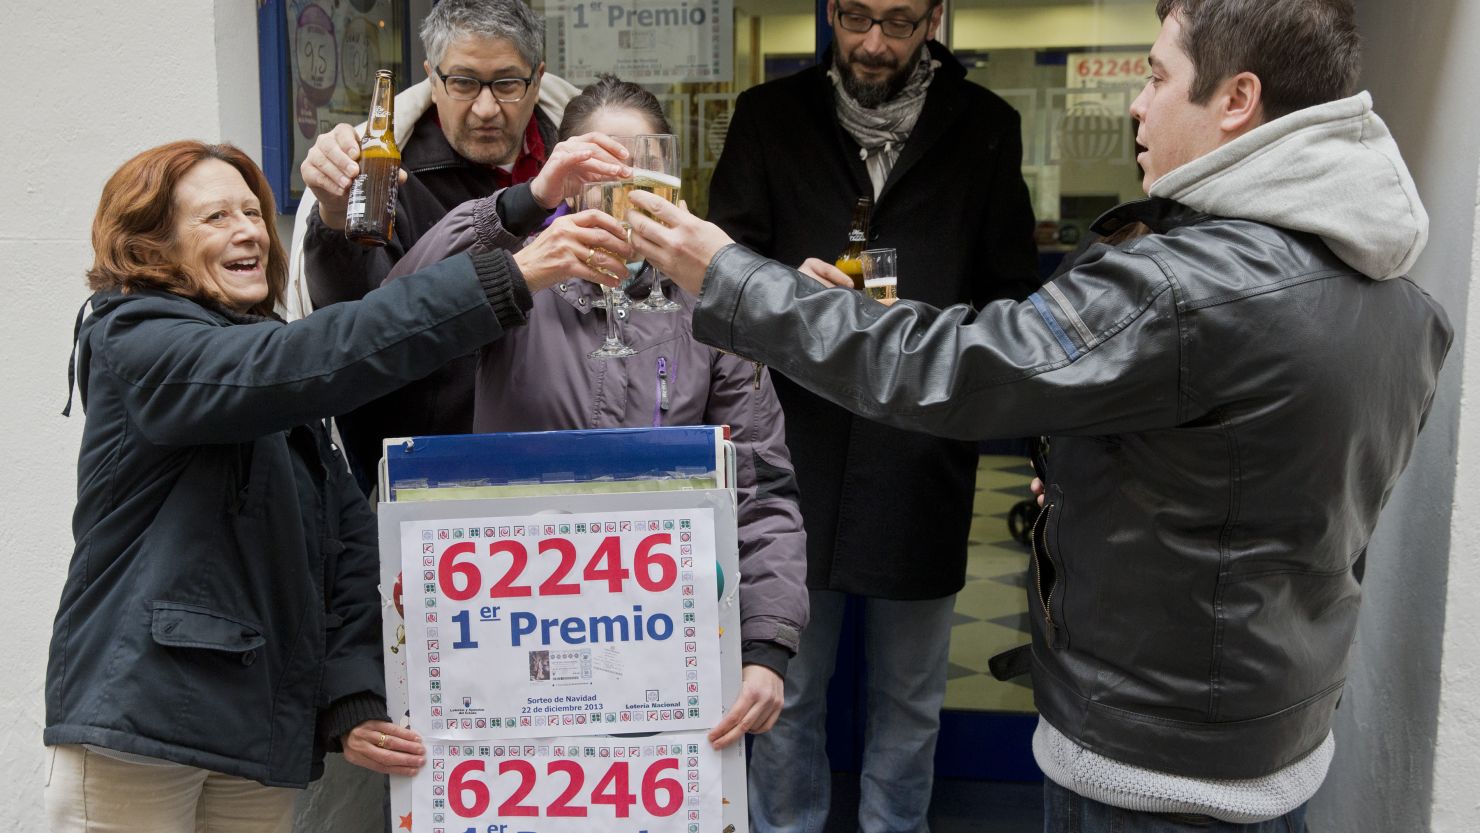 Lottery Administration owners and locals celebrate having sold a first prize ticket in Spain's Christmas lottery named "El Gordo" (Fat One) in Palencia on December 22, 2013.